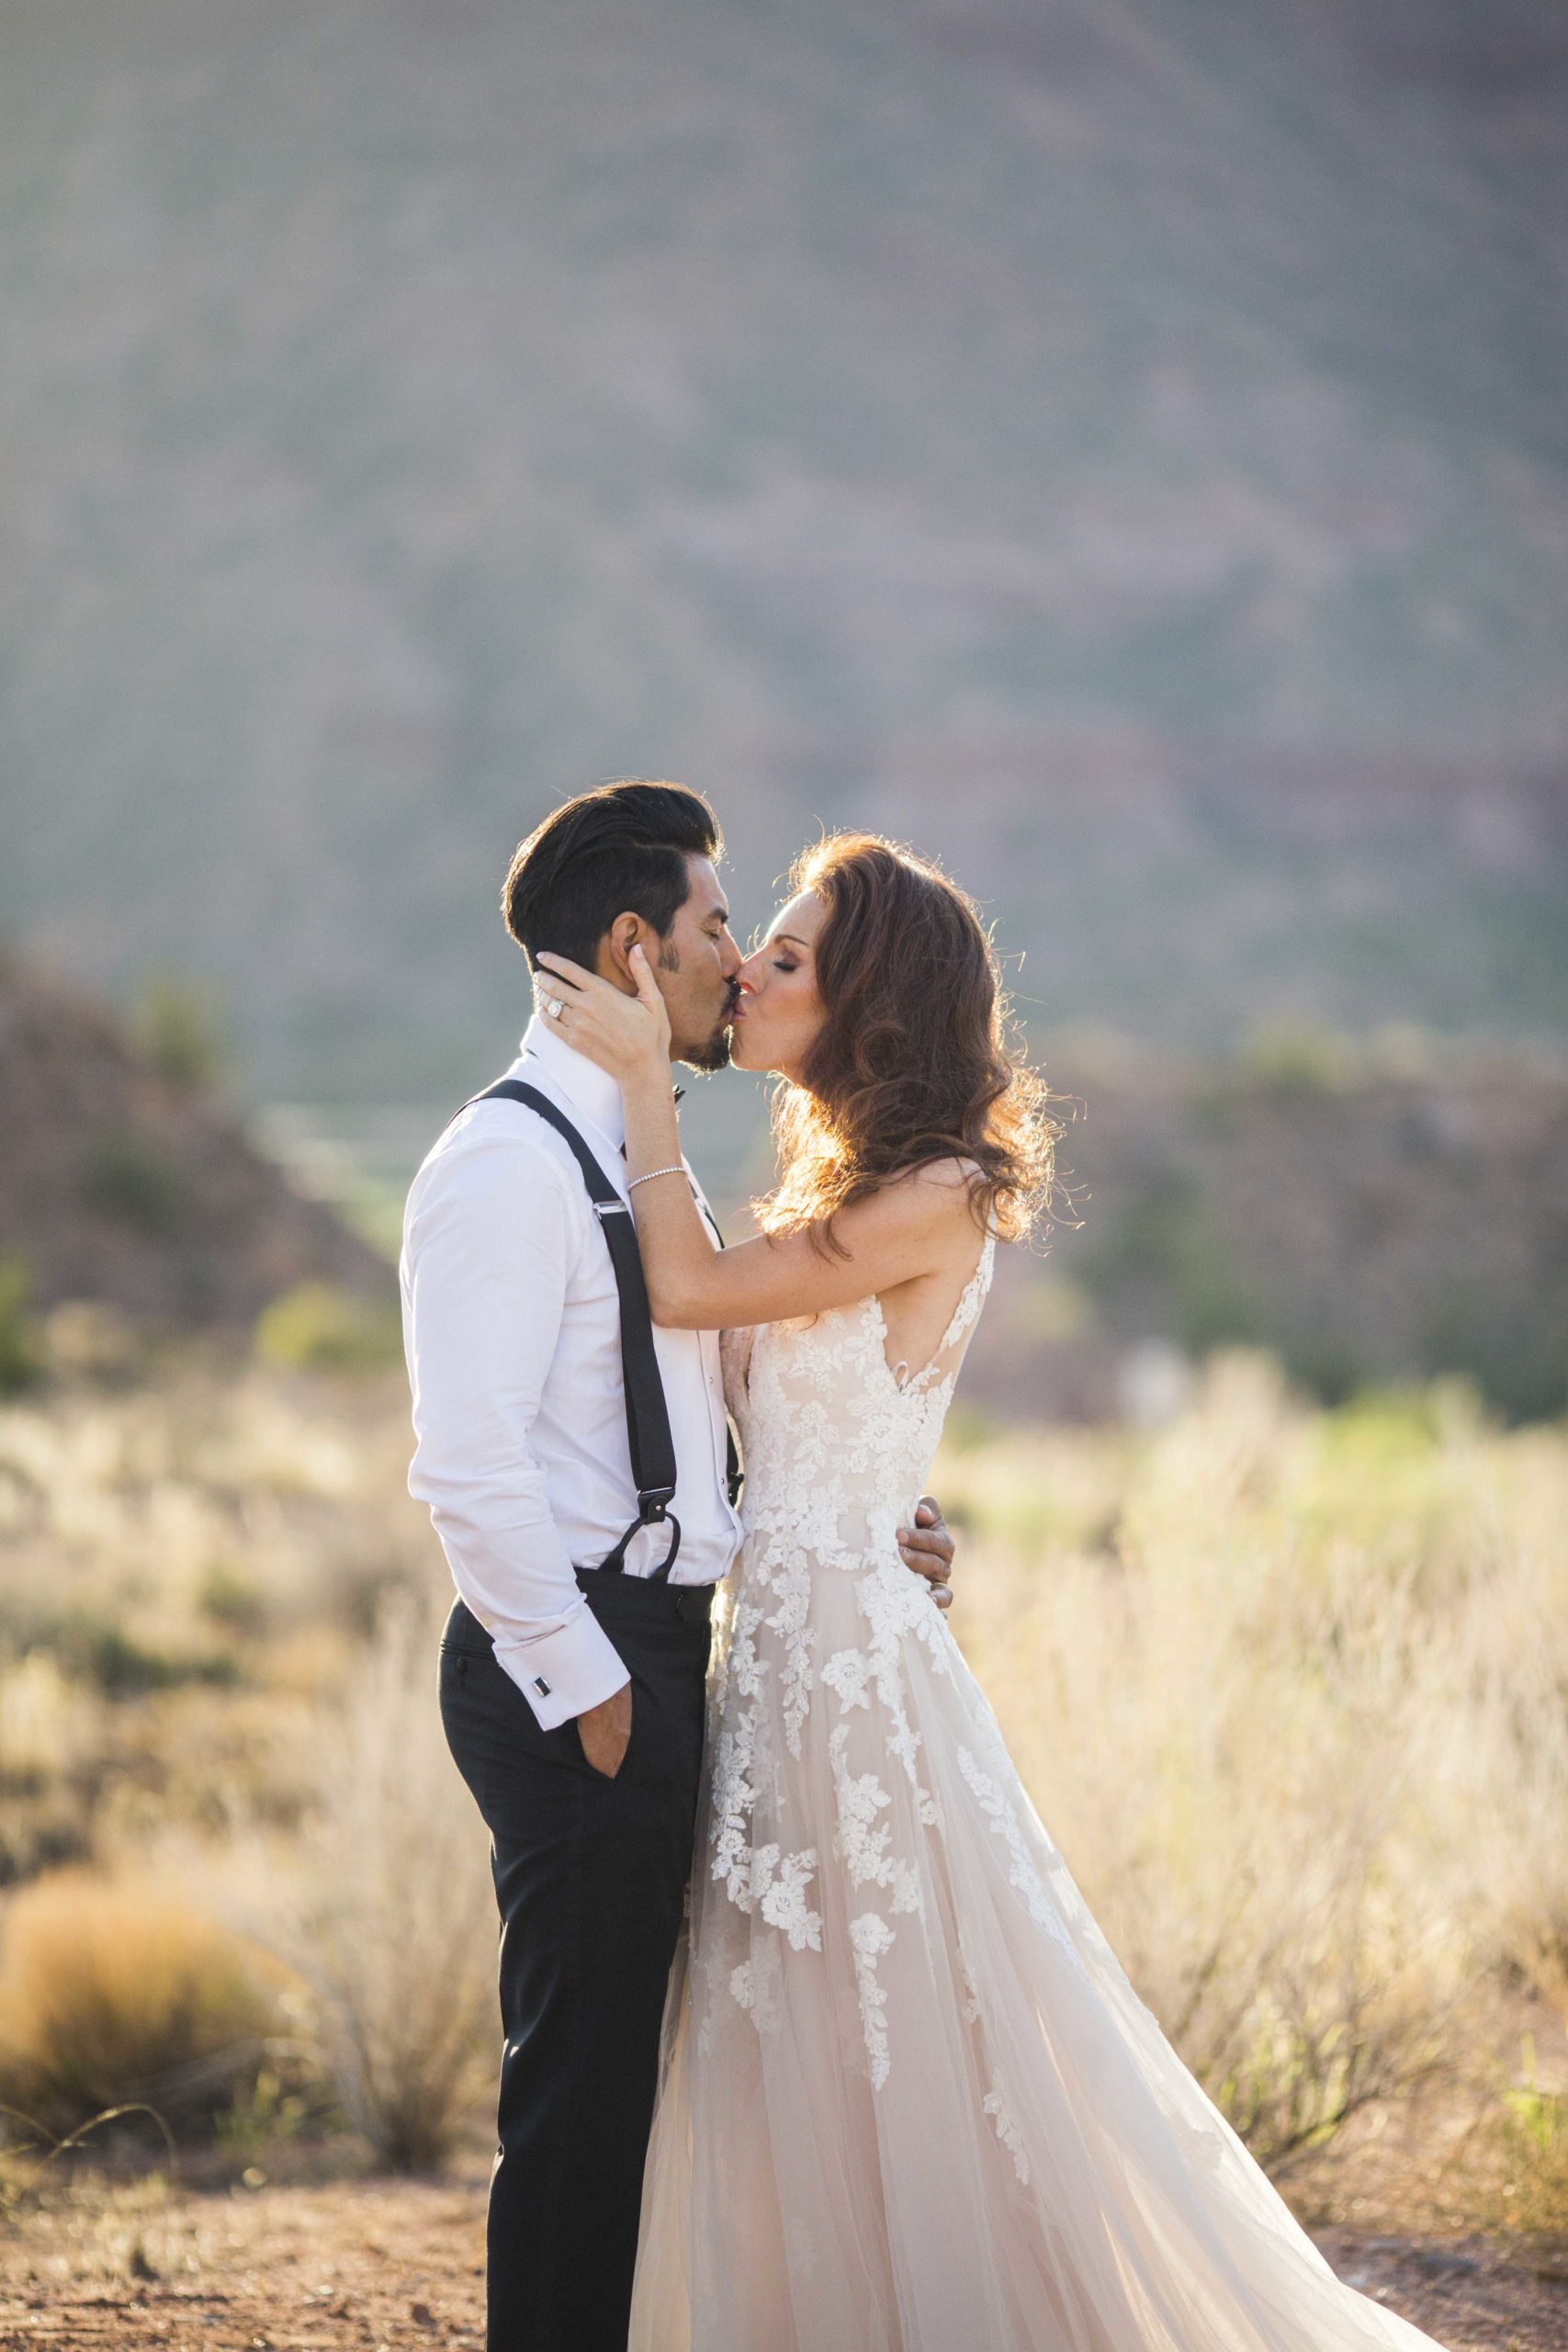 Why You Need a Denver Wedding Planner